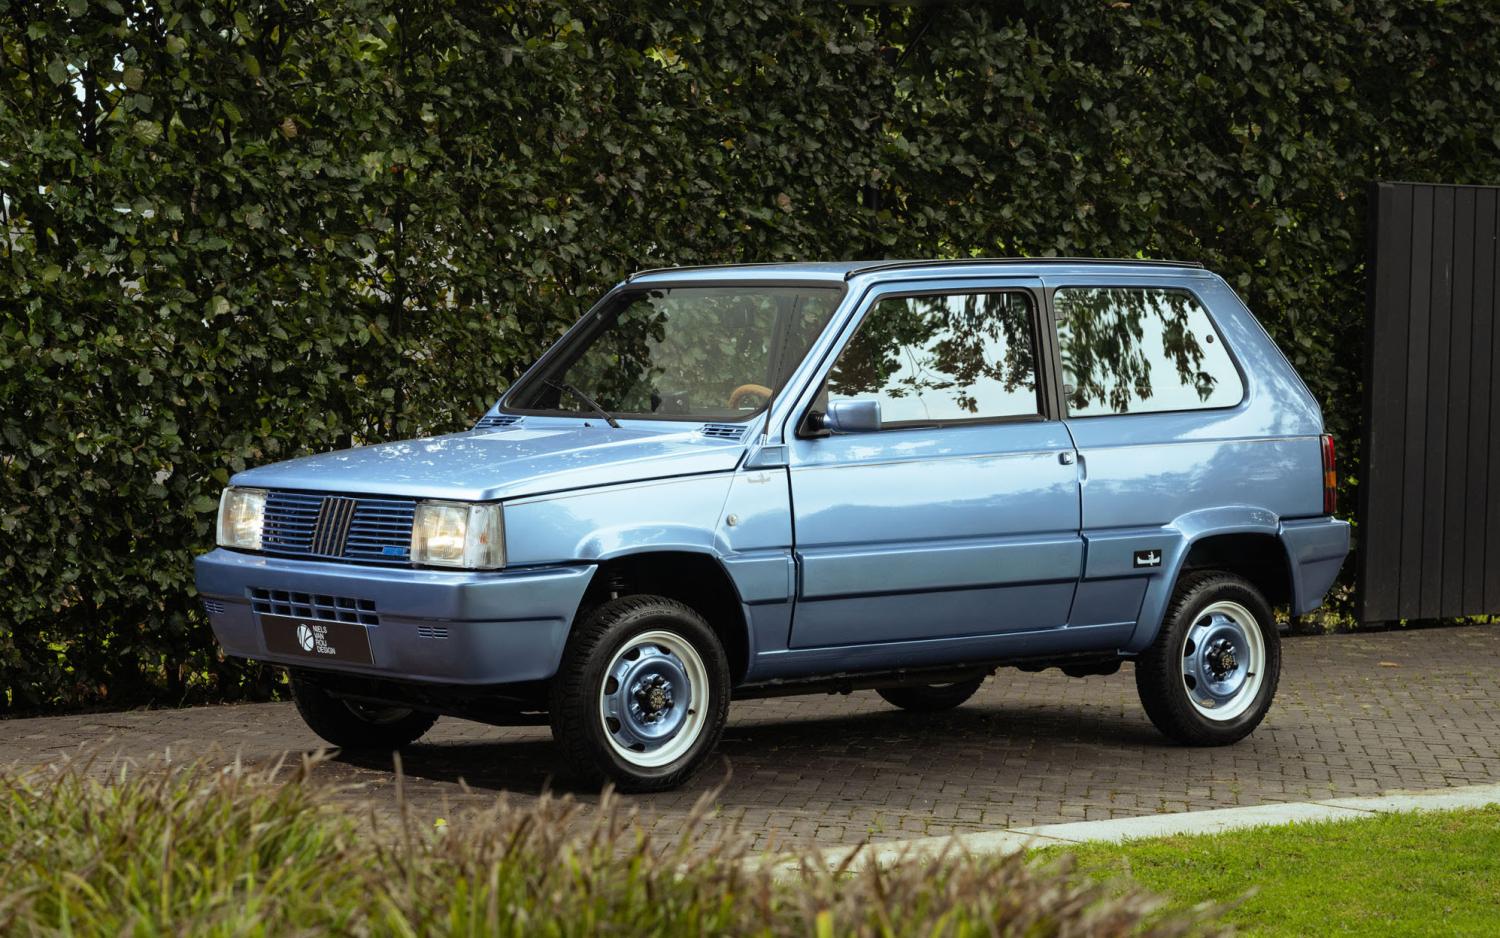 The Fiat Panda 4x4 Piccolo Lusso Is A Restomod Of Adorable Proportions